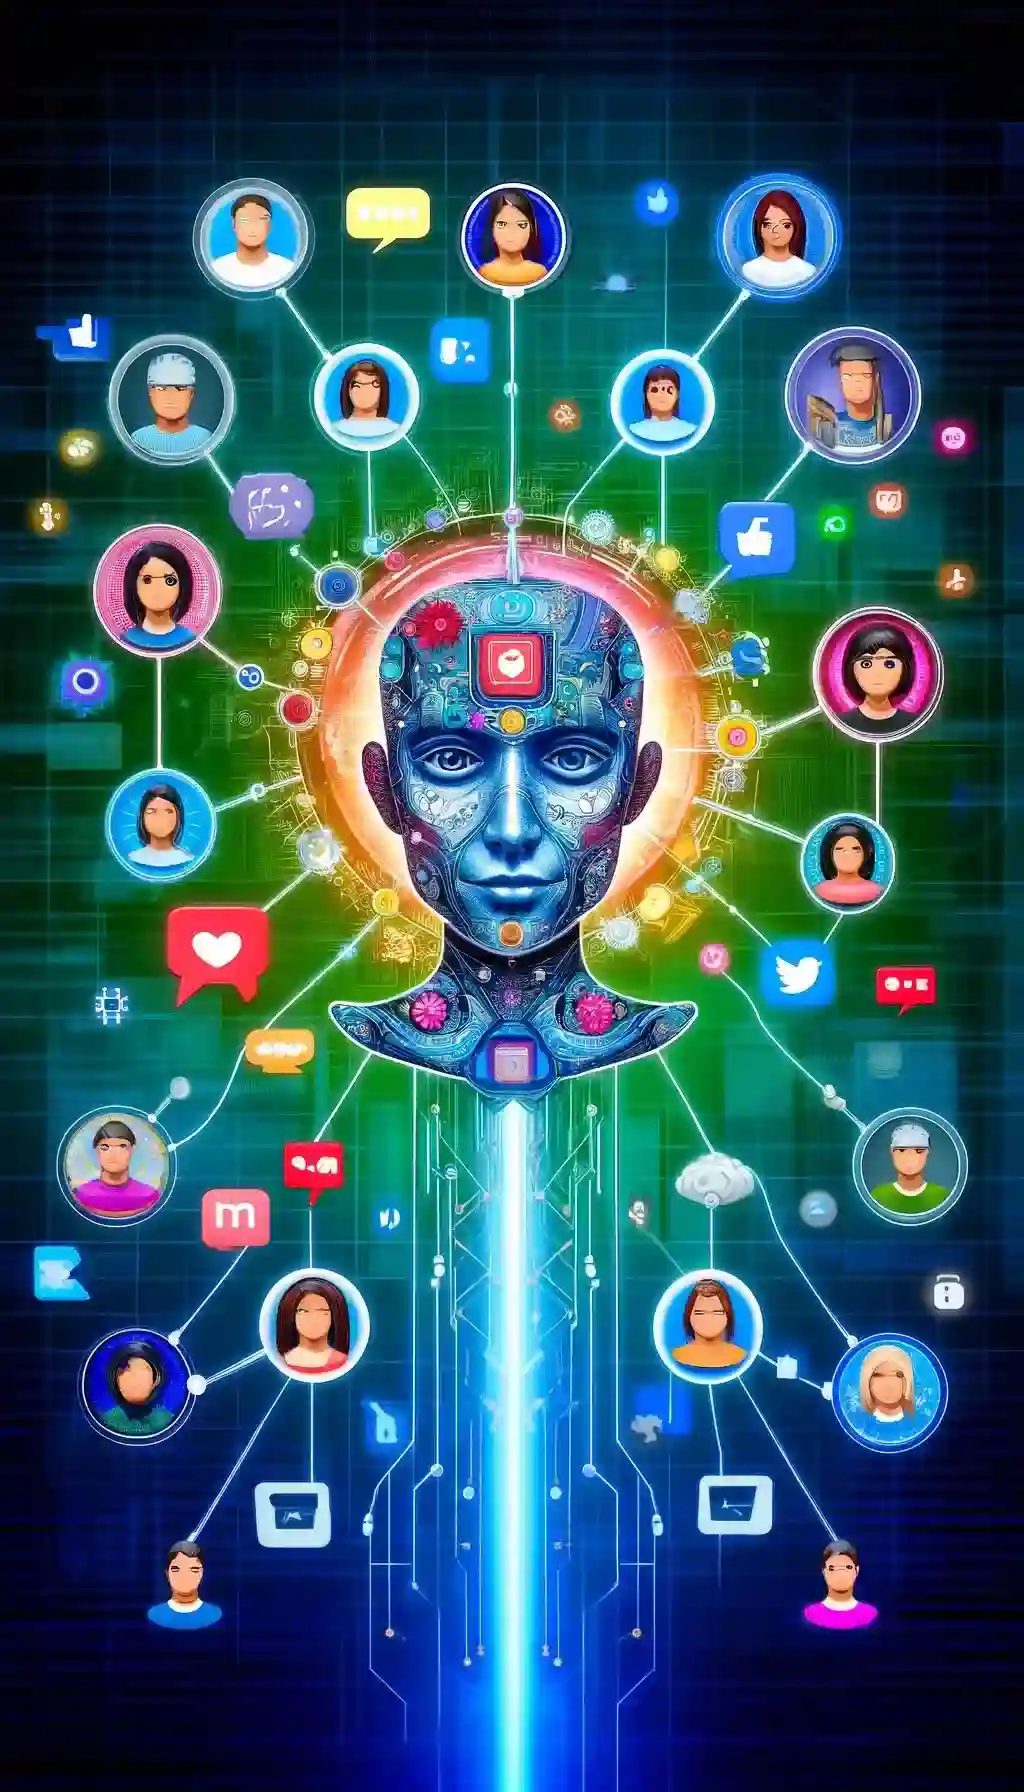 AI interface with diverse avatars representing social media engagement and digital connectivity.